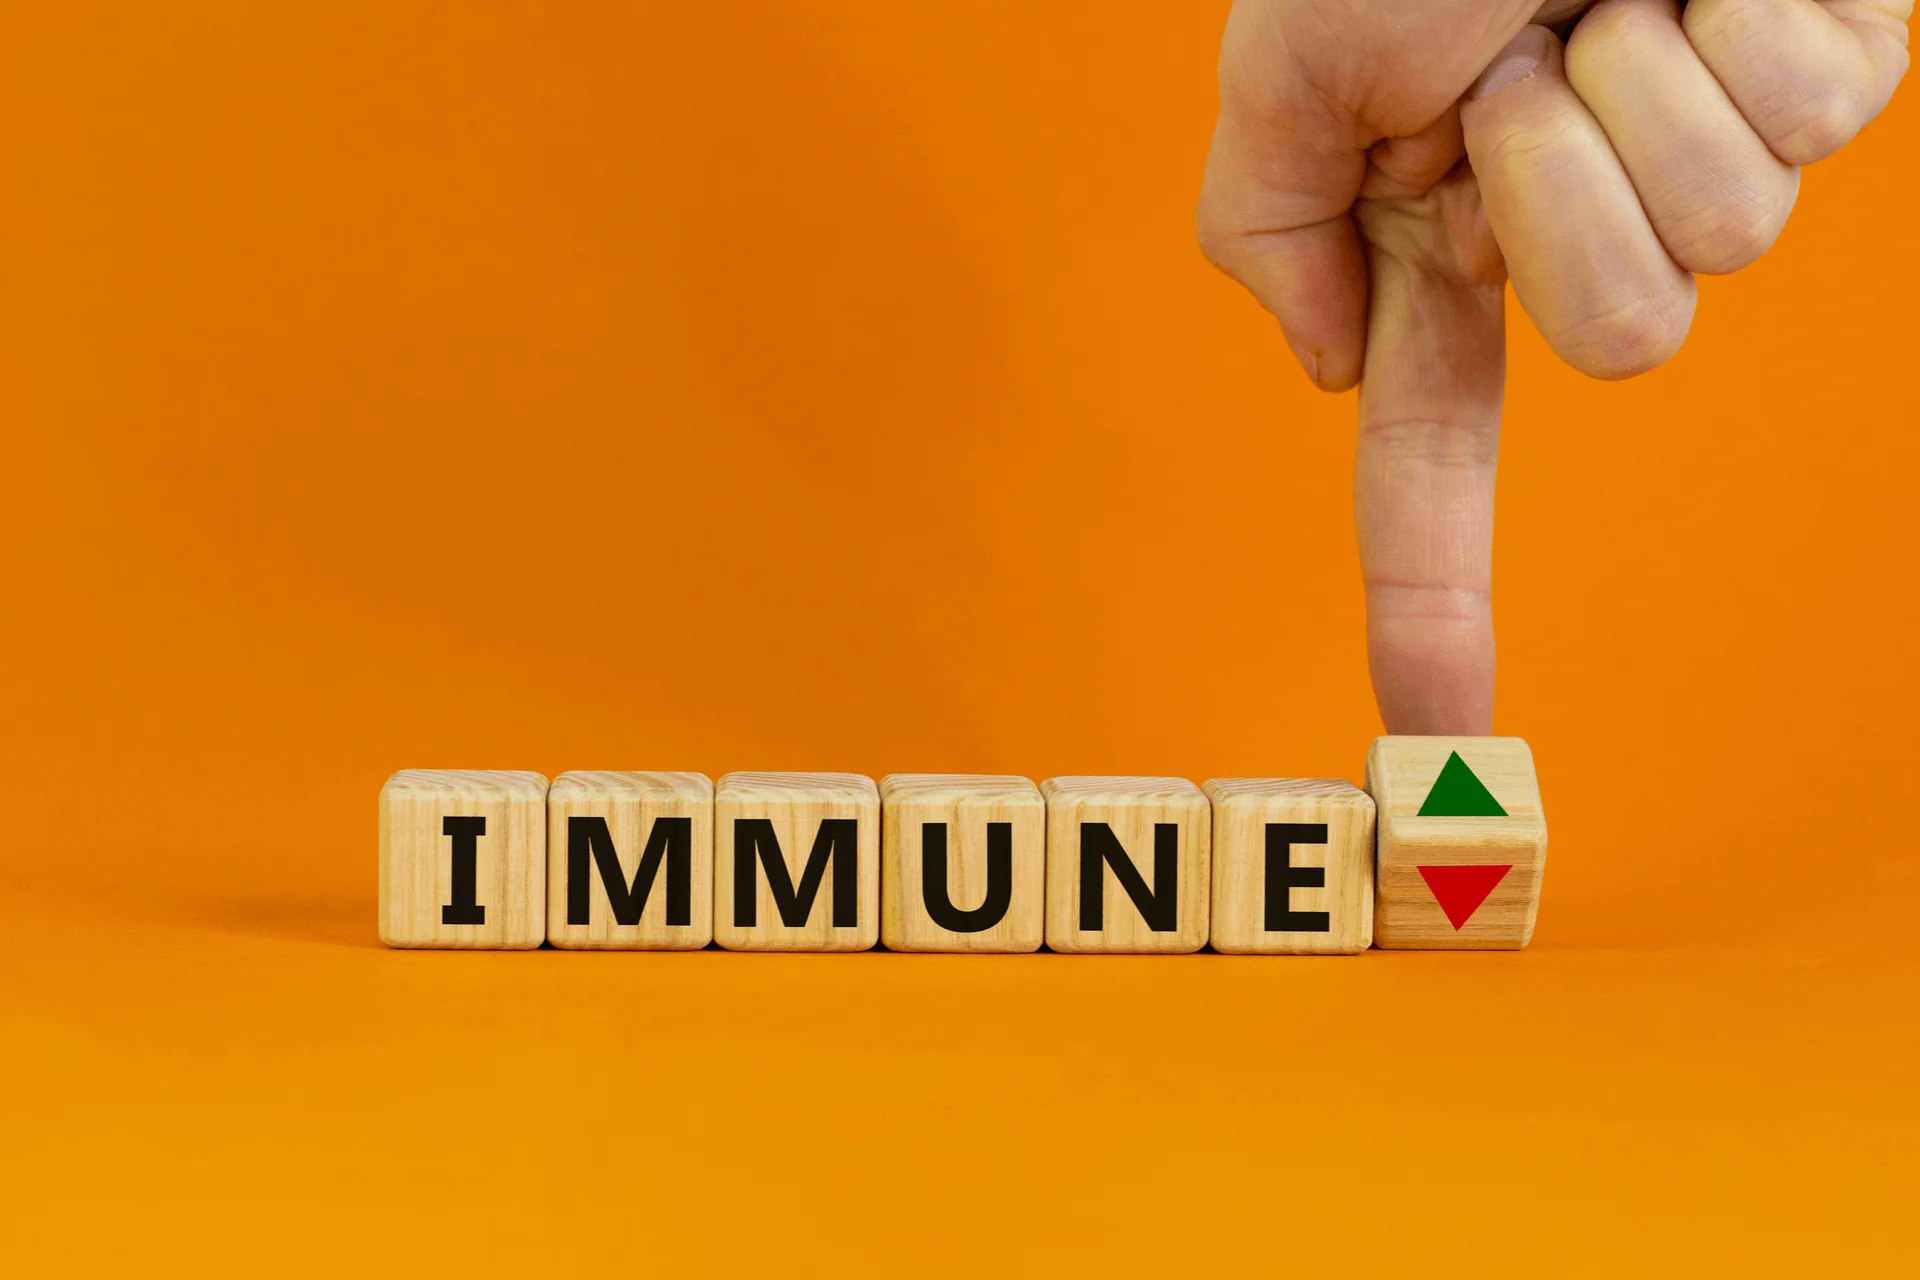 How to strengthen the immunity: tips to avoid getting sick